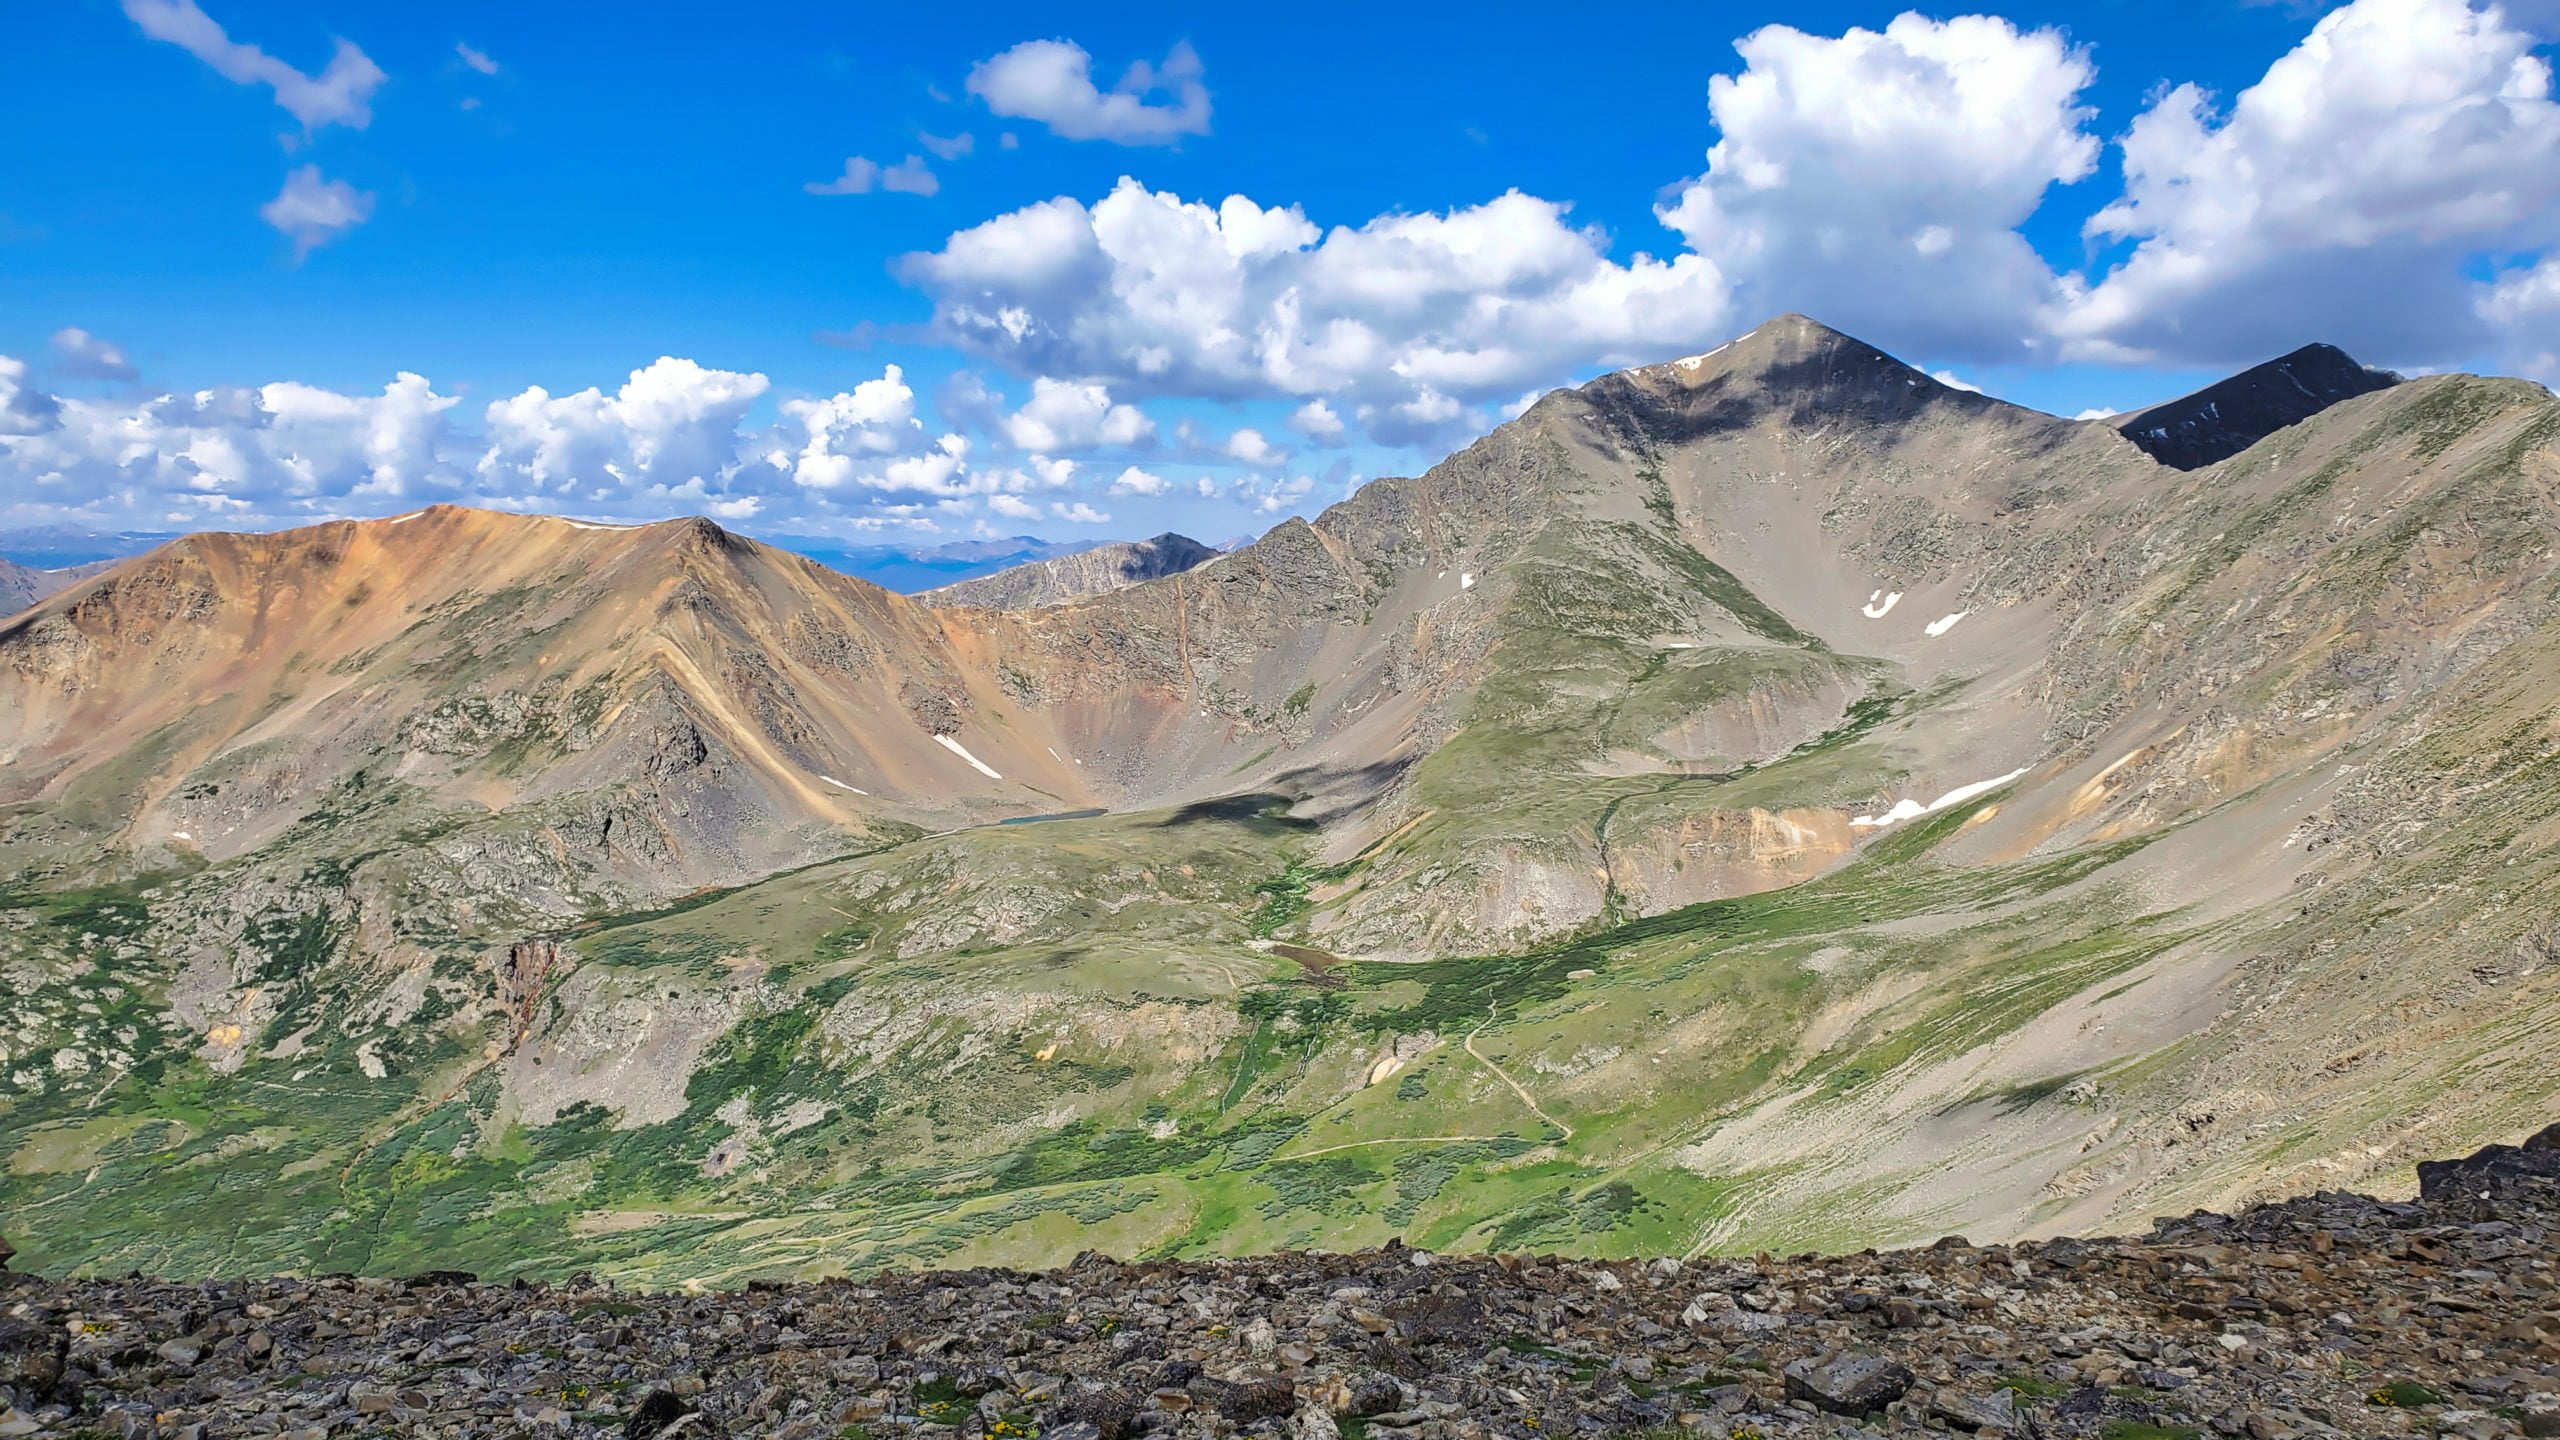 Grays Peak (right of center) is the highest point along the Continental Divide